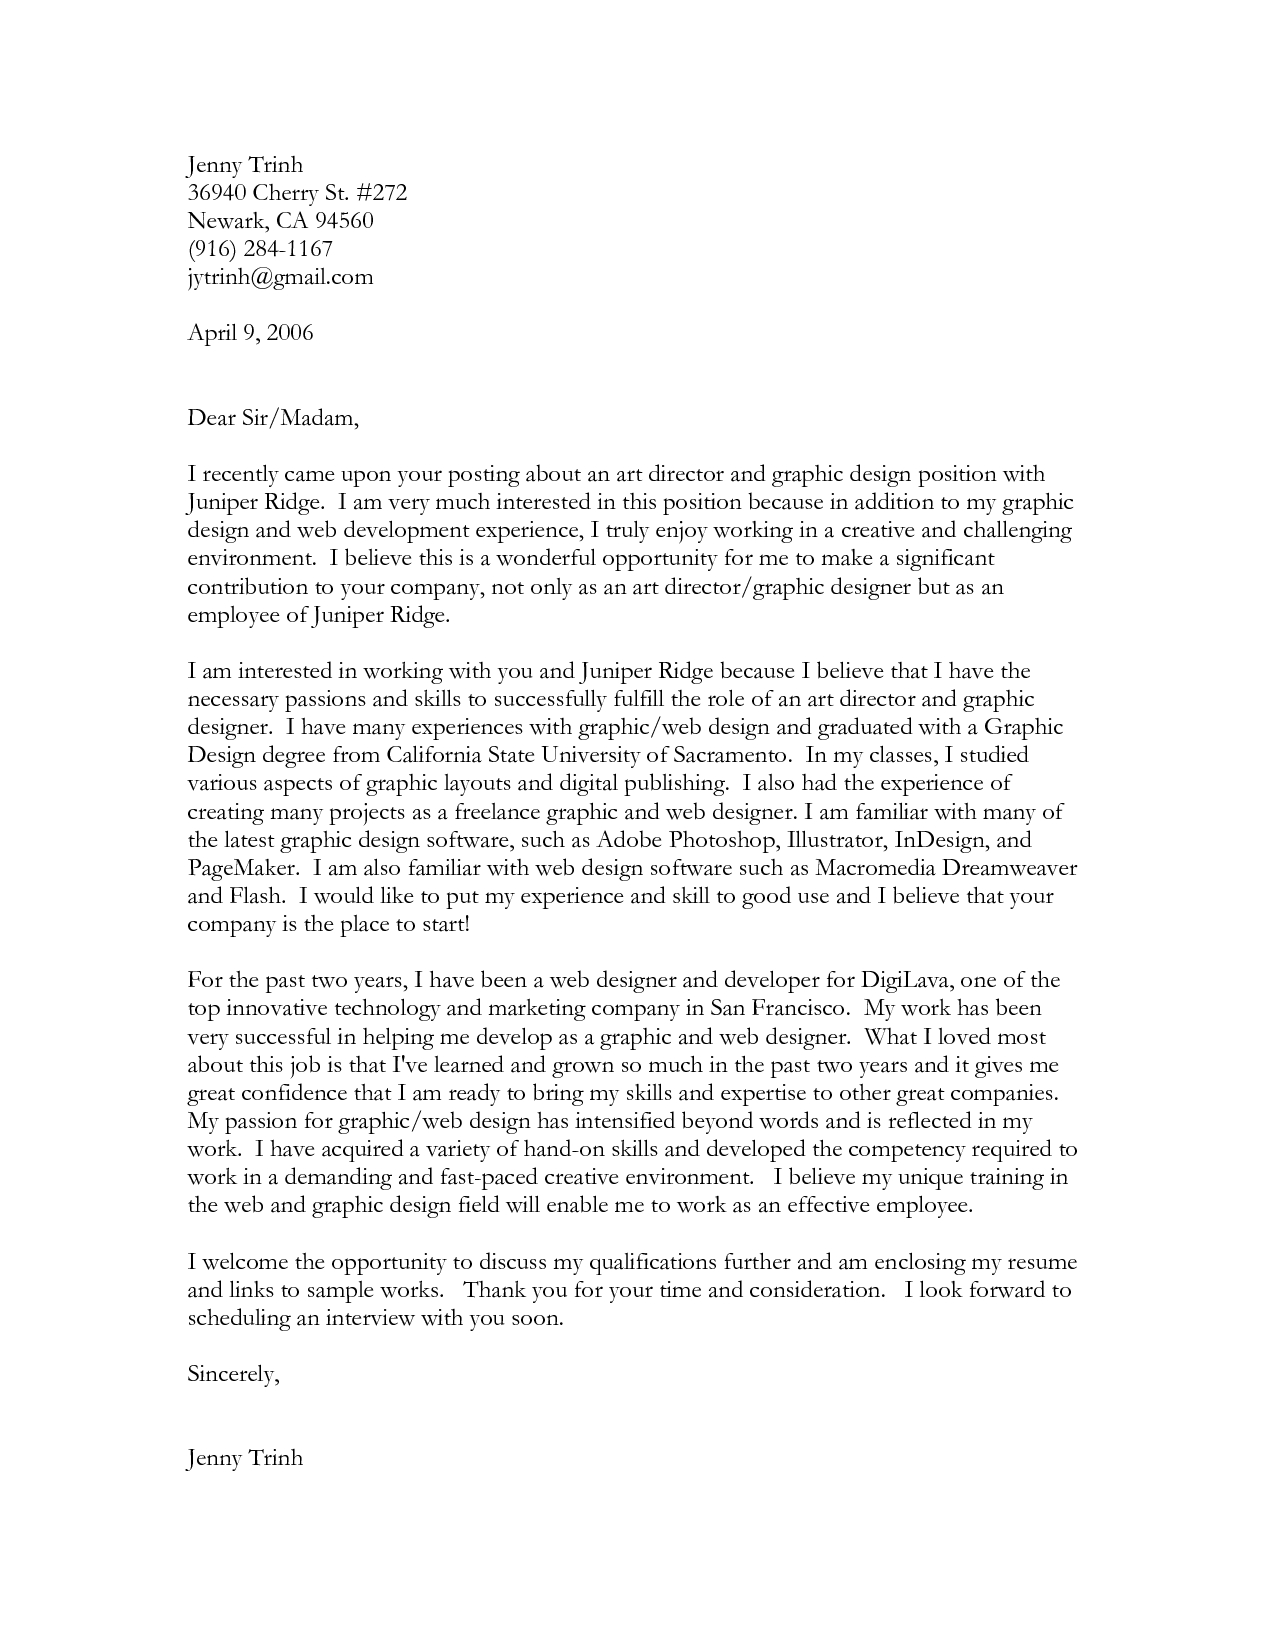 Recommendation Letters For Creative Directors Art Director regarding sizing 1275 X 1650